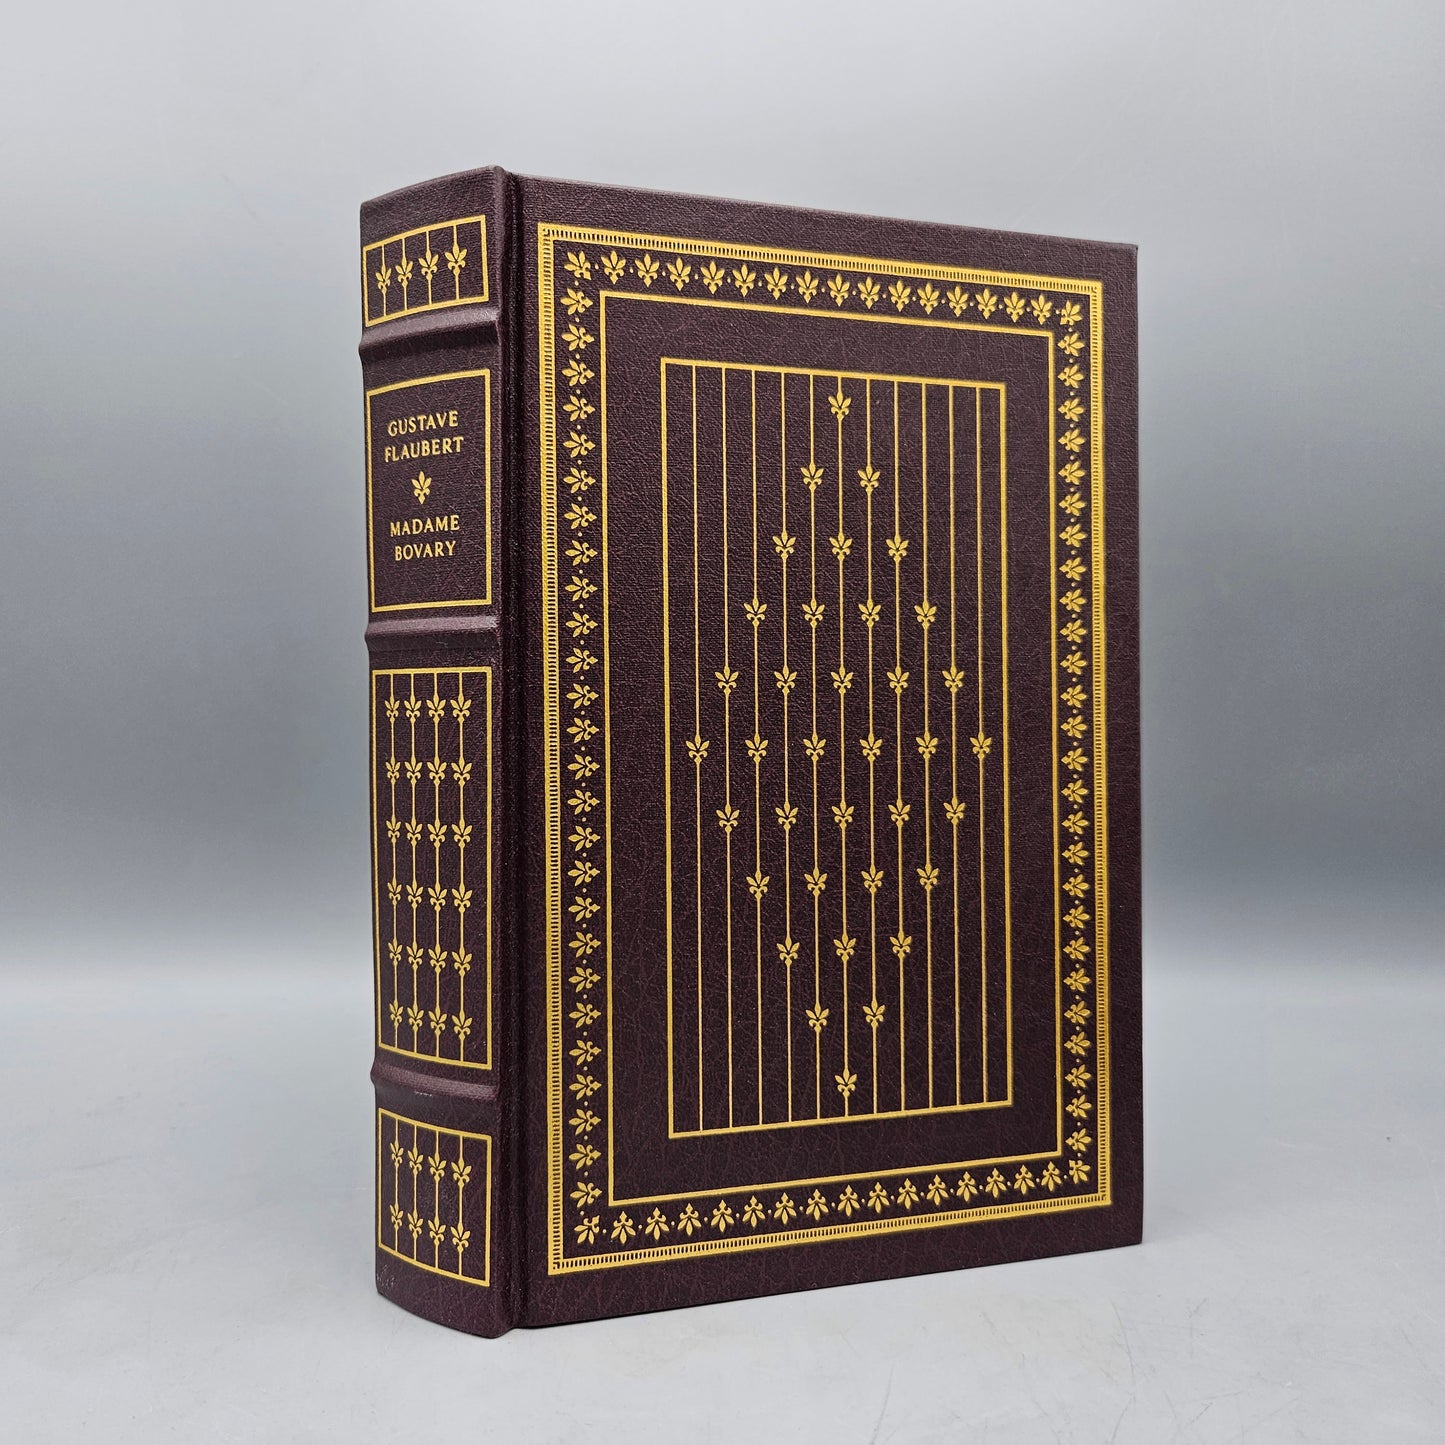 Leatherbound Book - Gustave Flaubert "Madame Bovary" Franklin Library